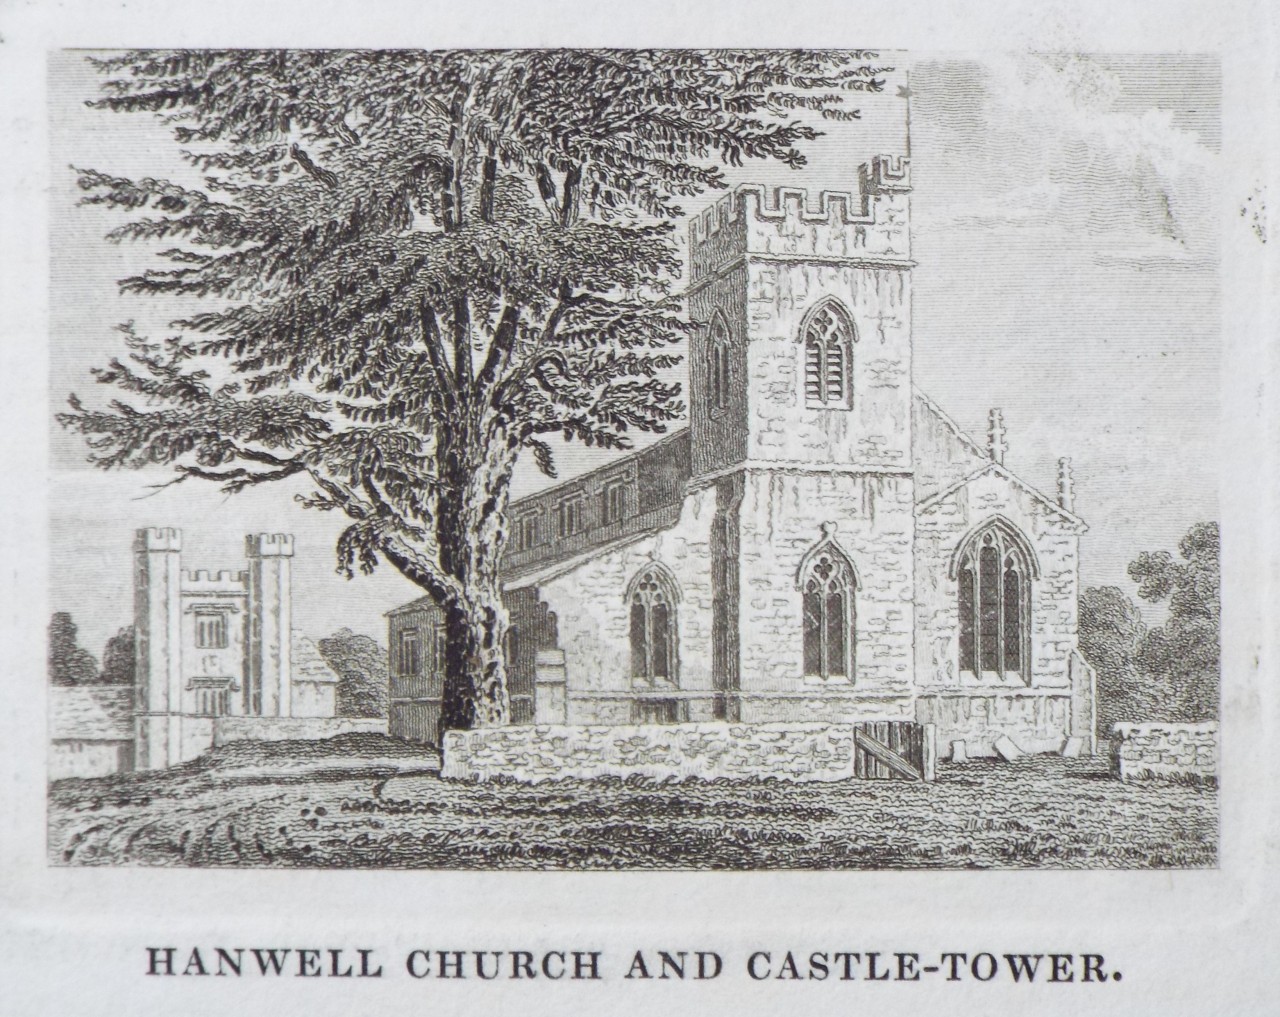 Print - Hanwell Church and Castle-Tower.